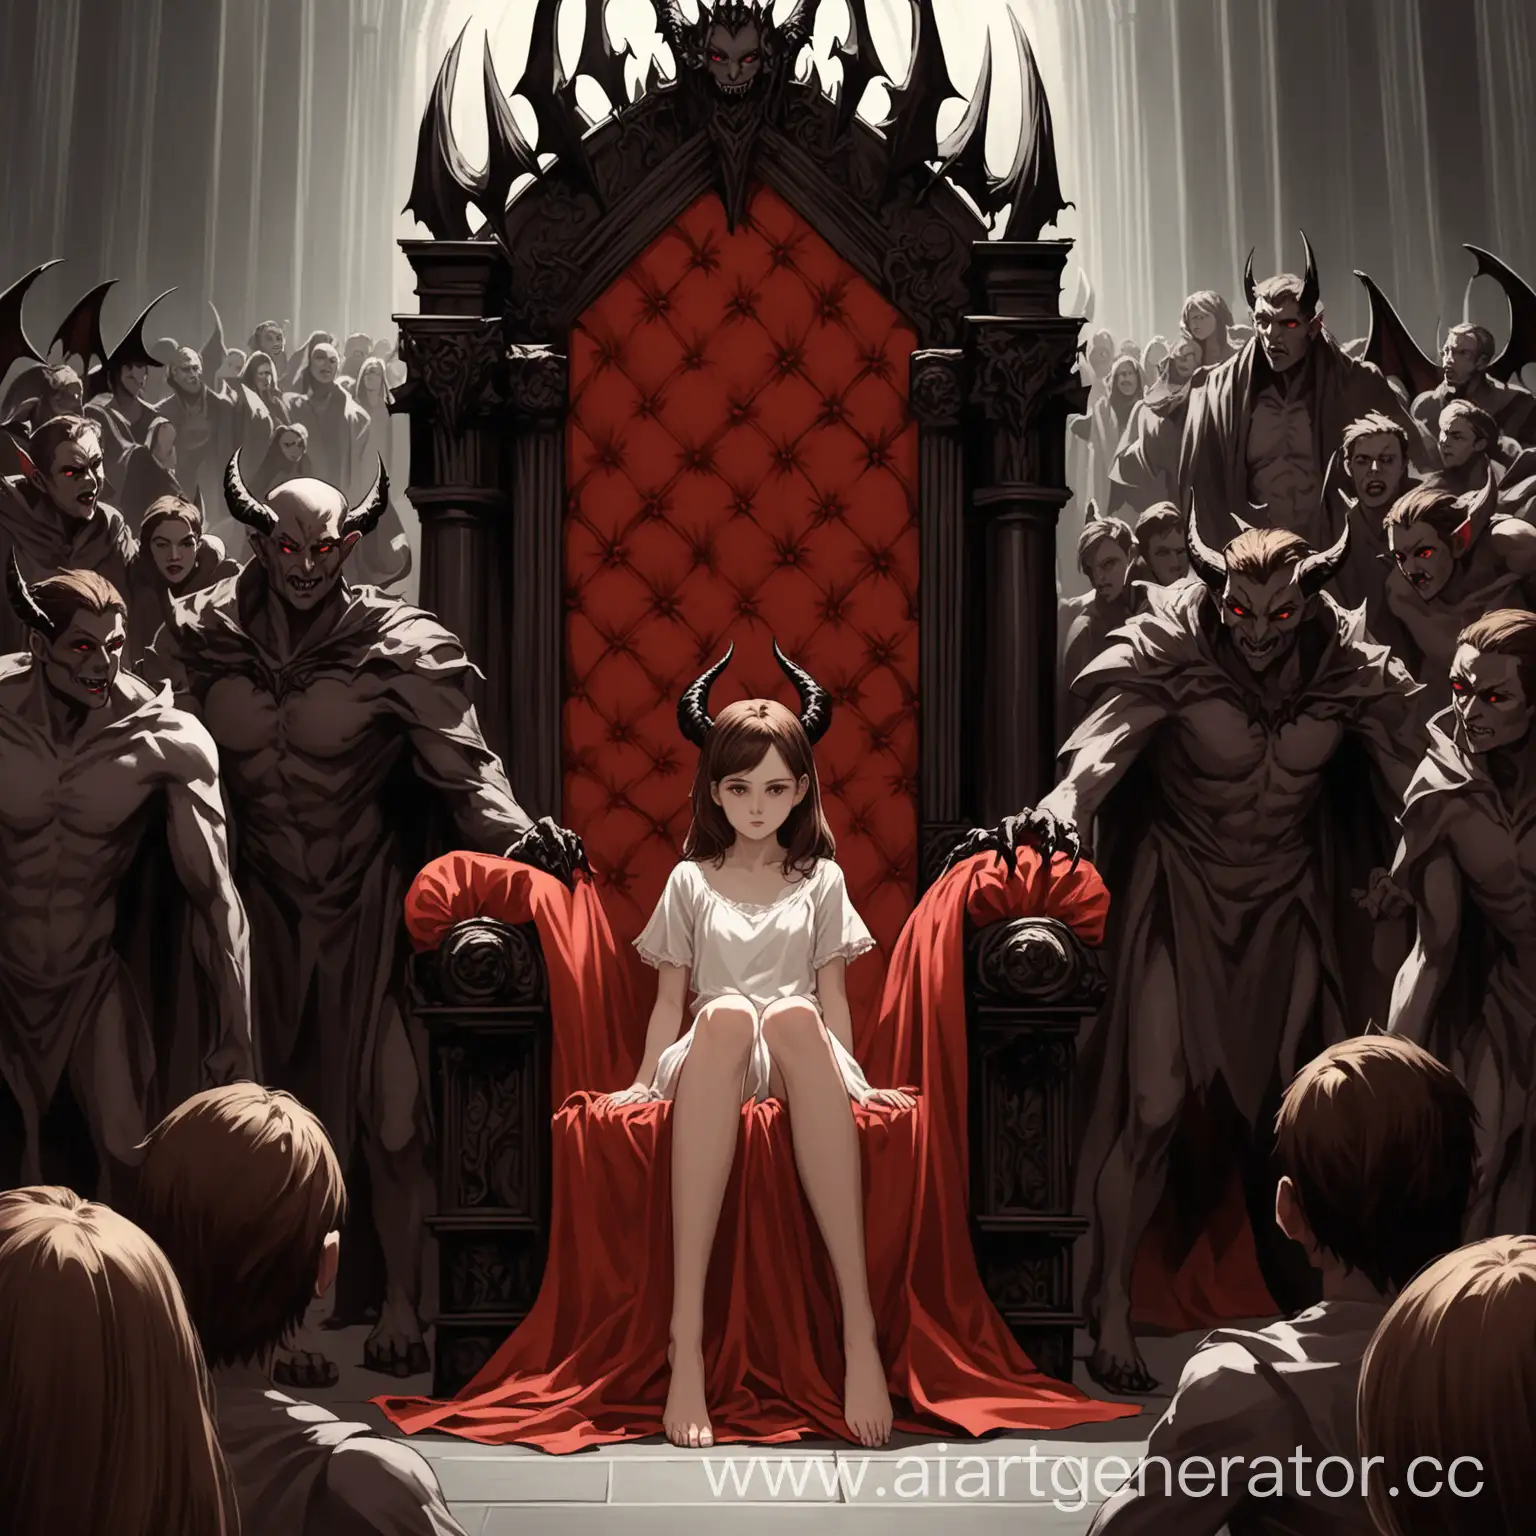 Girl-on-Throne-with-Demon-and-Supine-Figures